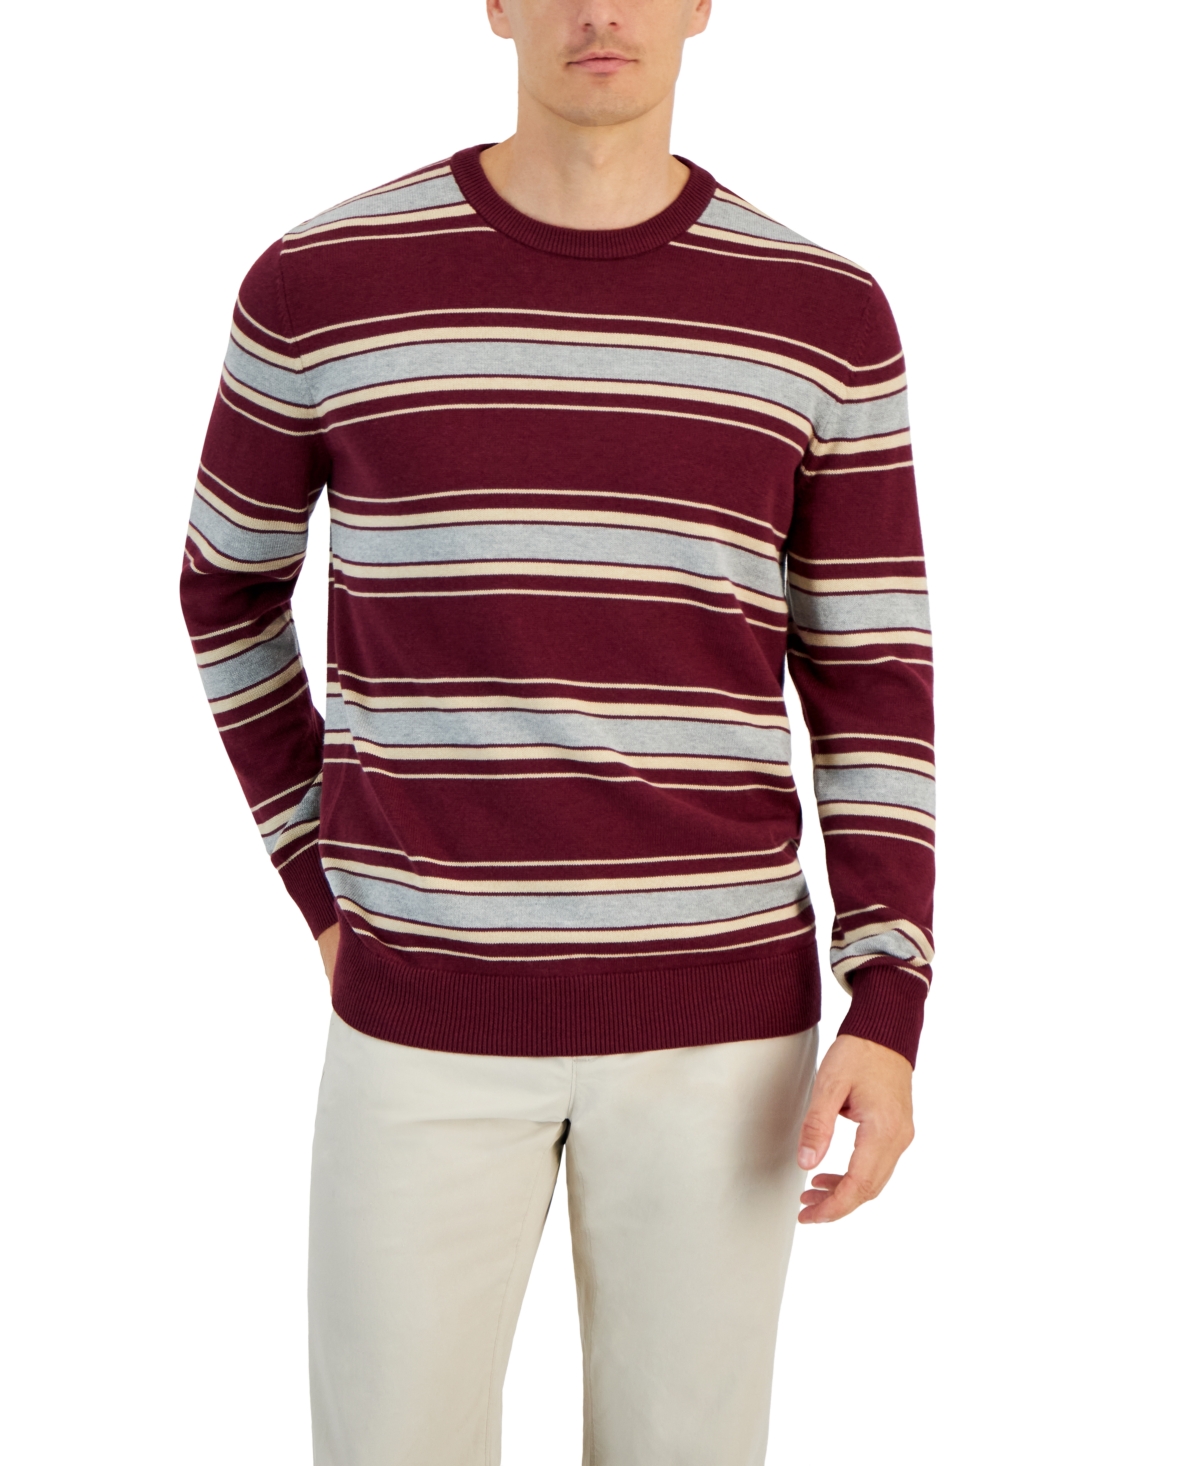 Men's Elevated Striped Long Sleeve Crewneck Sweater, Created for Macy's - Red Plum